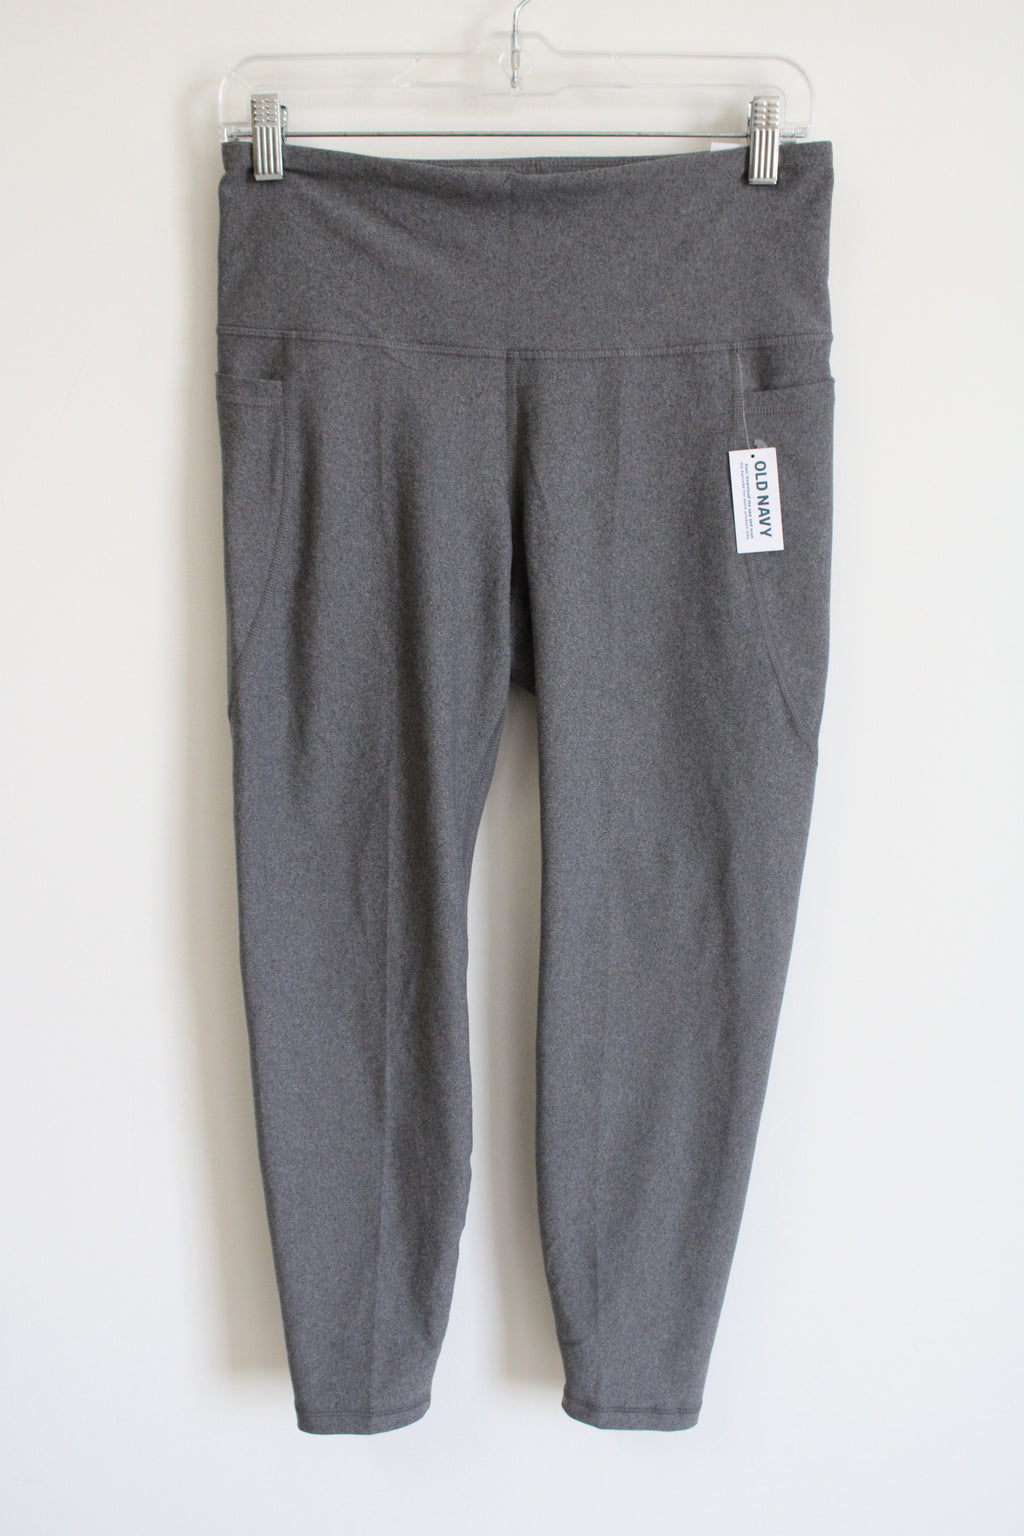 NEW Old Navy Powersoft High Rise Gray Leggings | L